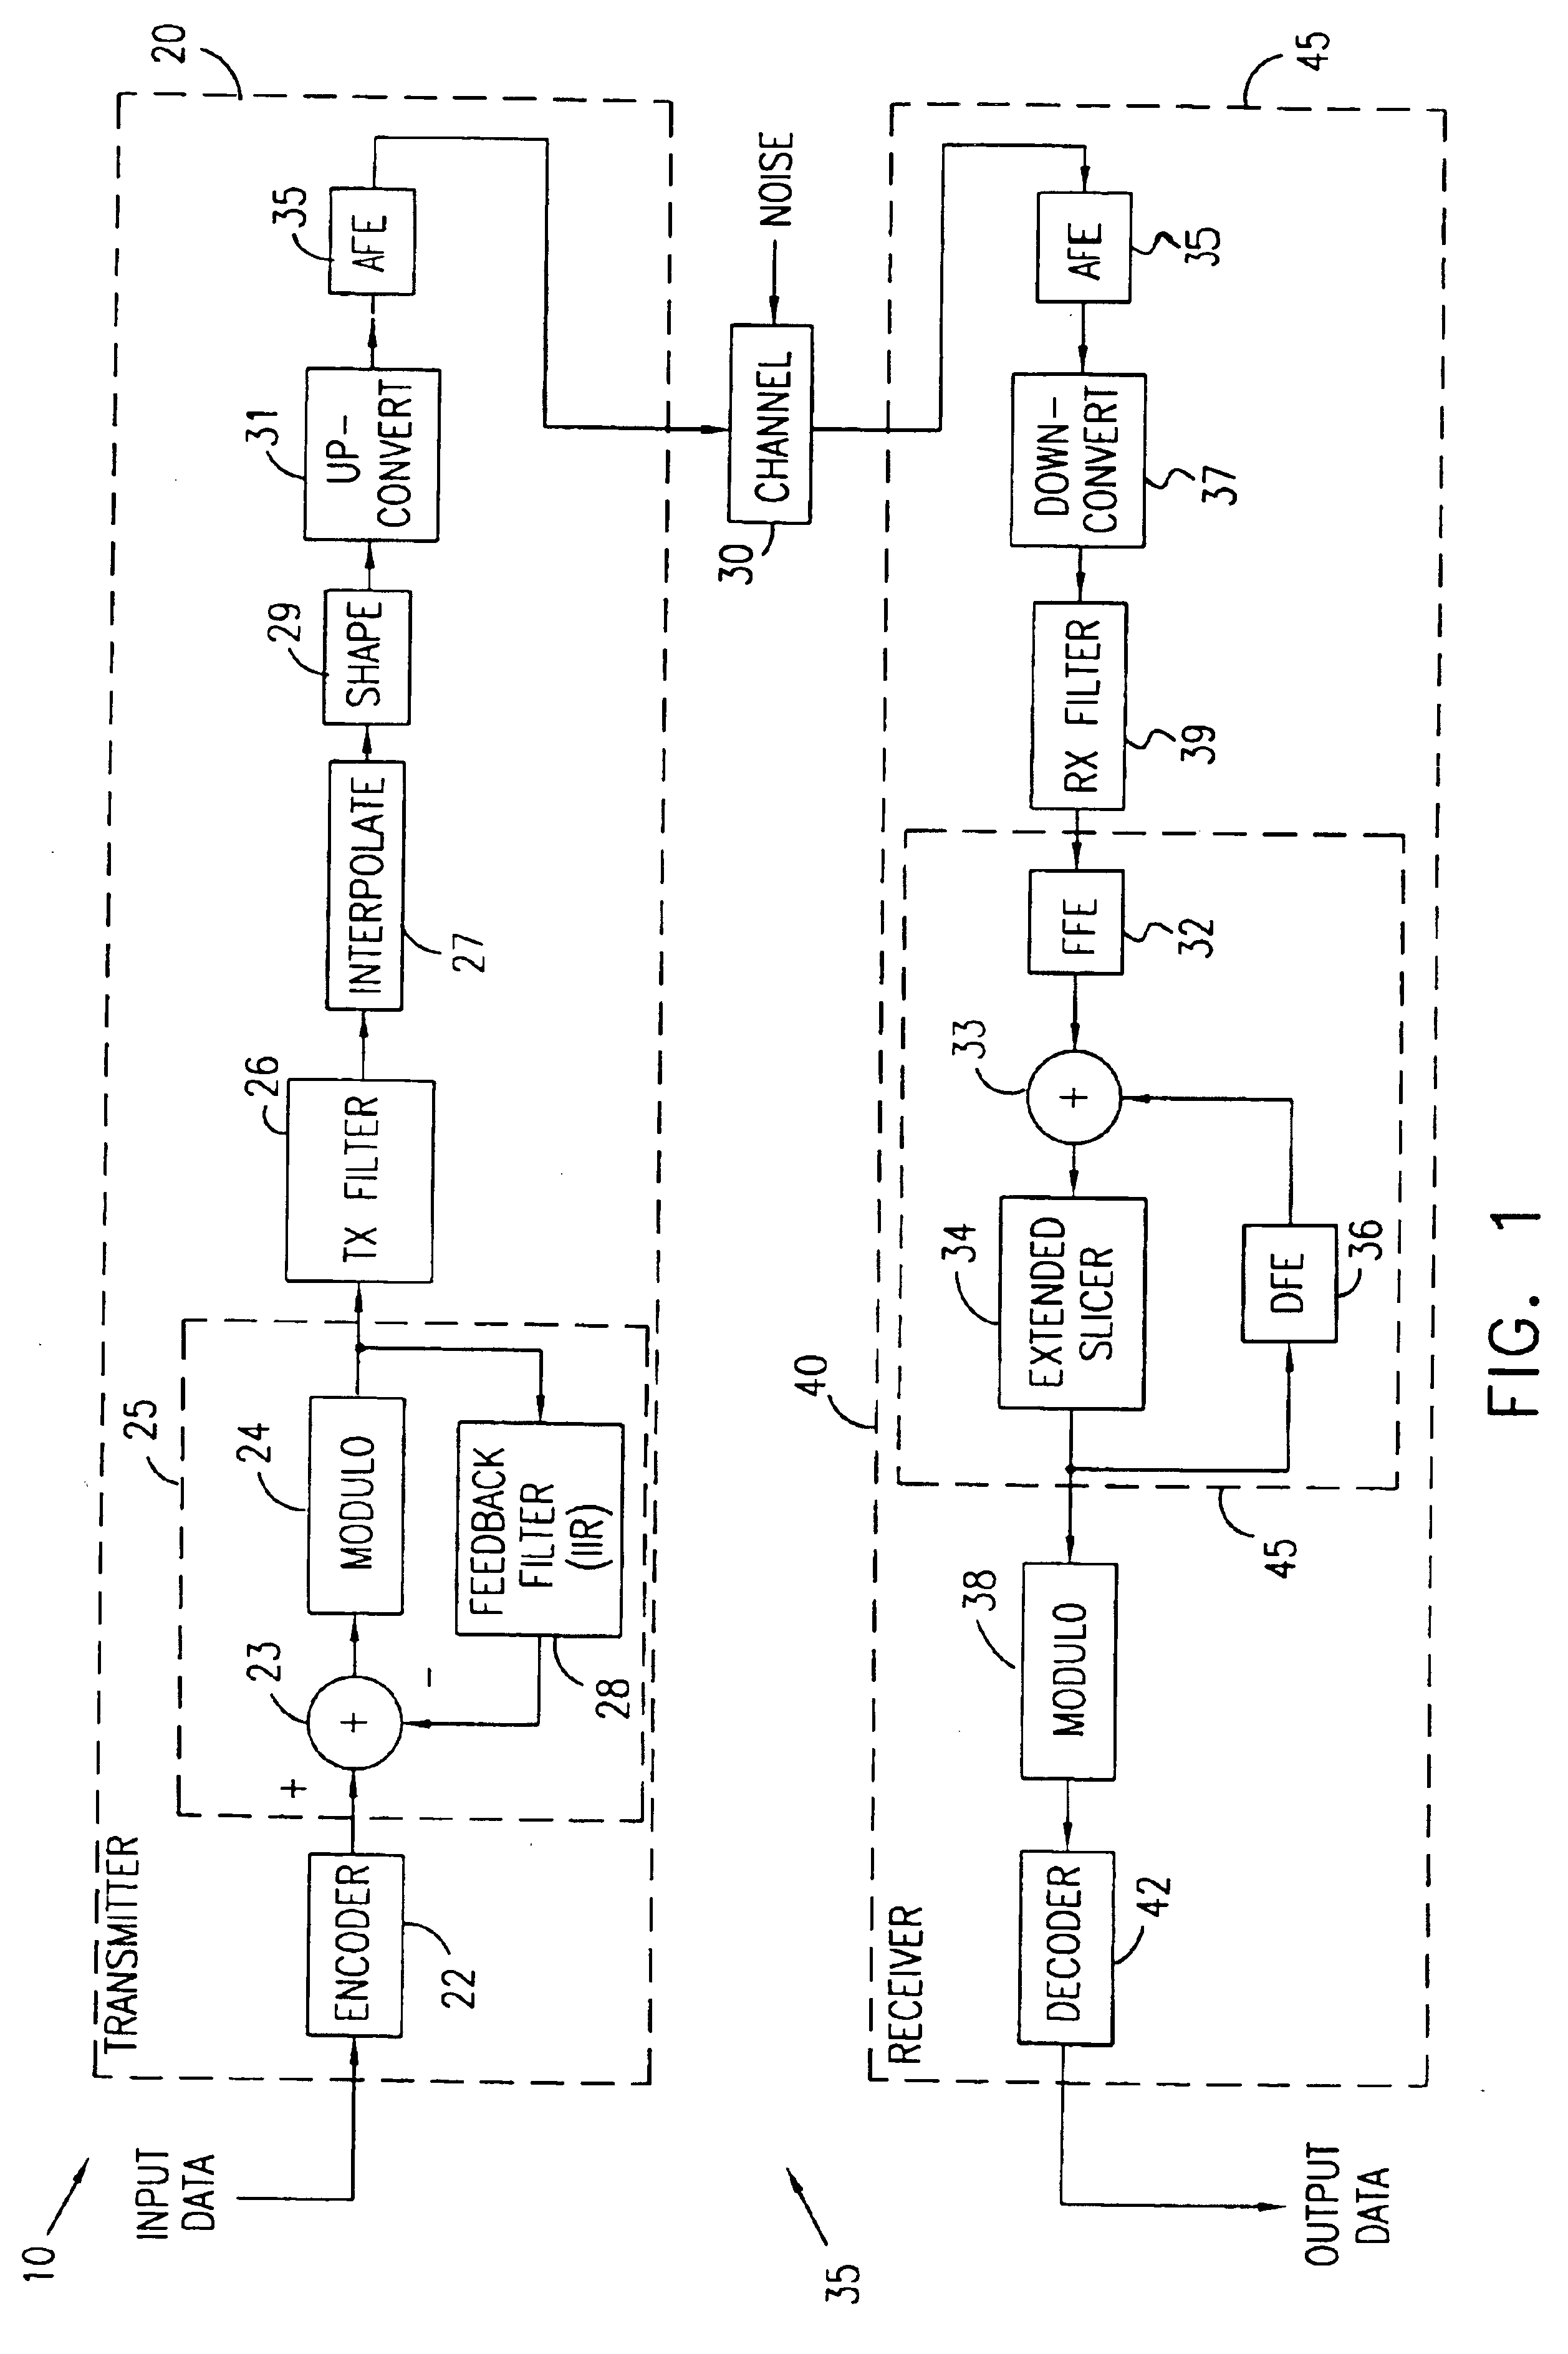 Data transceiver with filtering and precoding